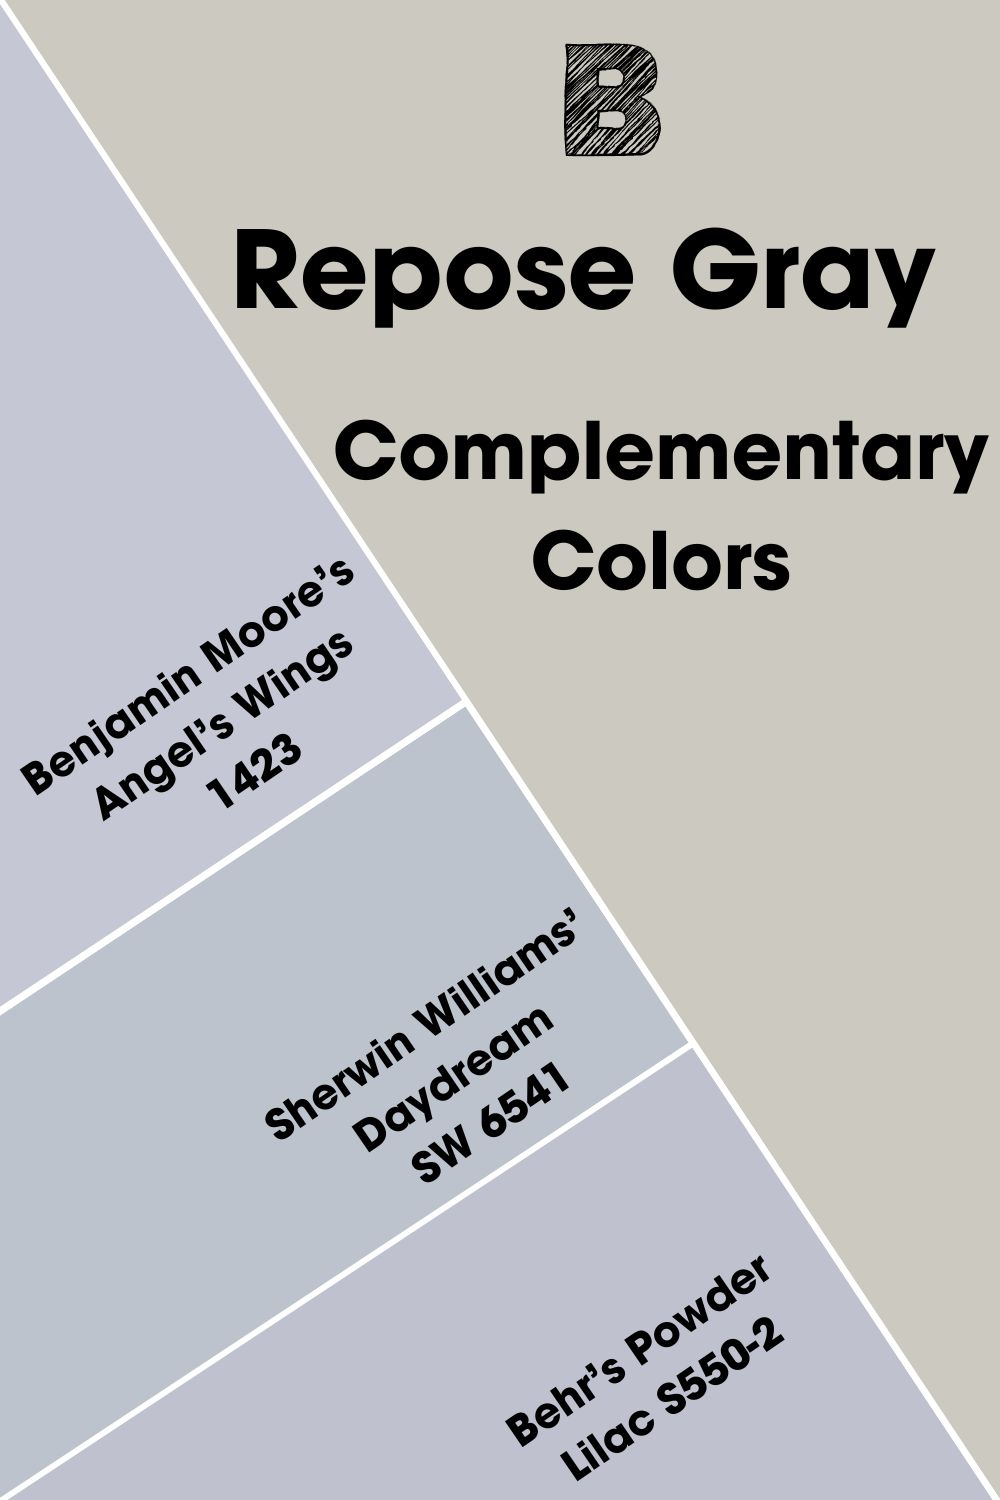 Repose Gray Complementary Colors